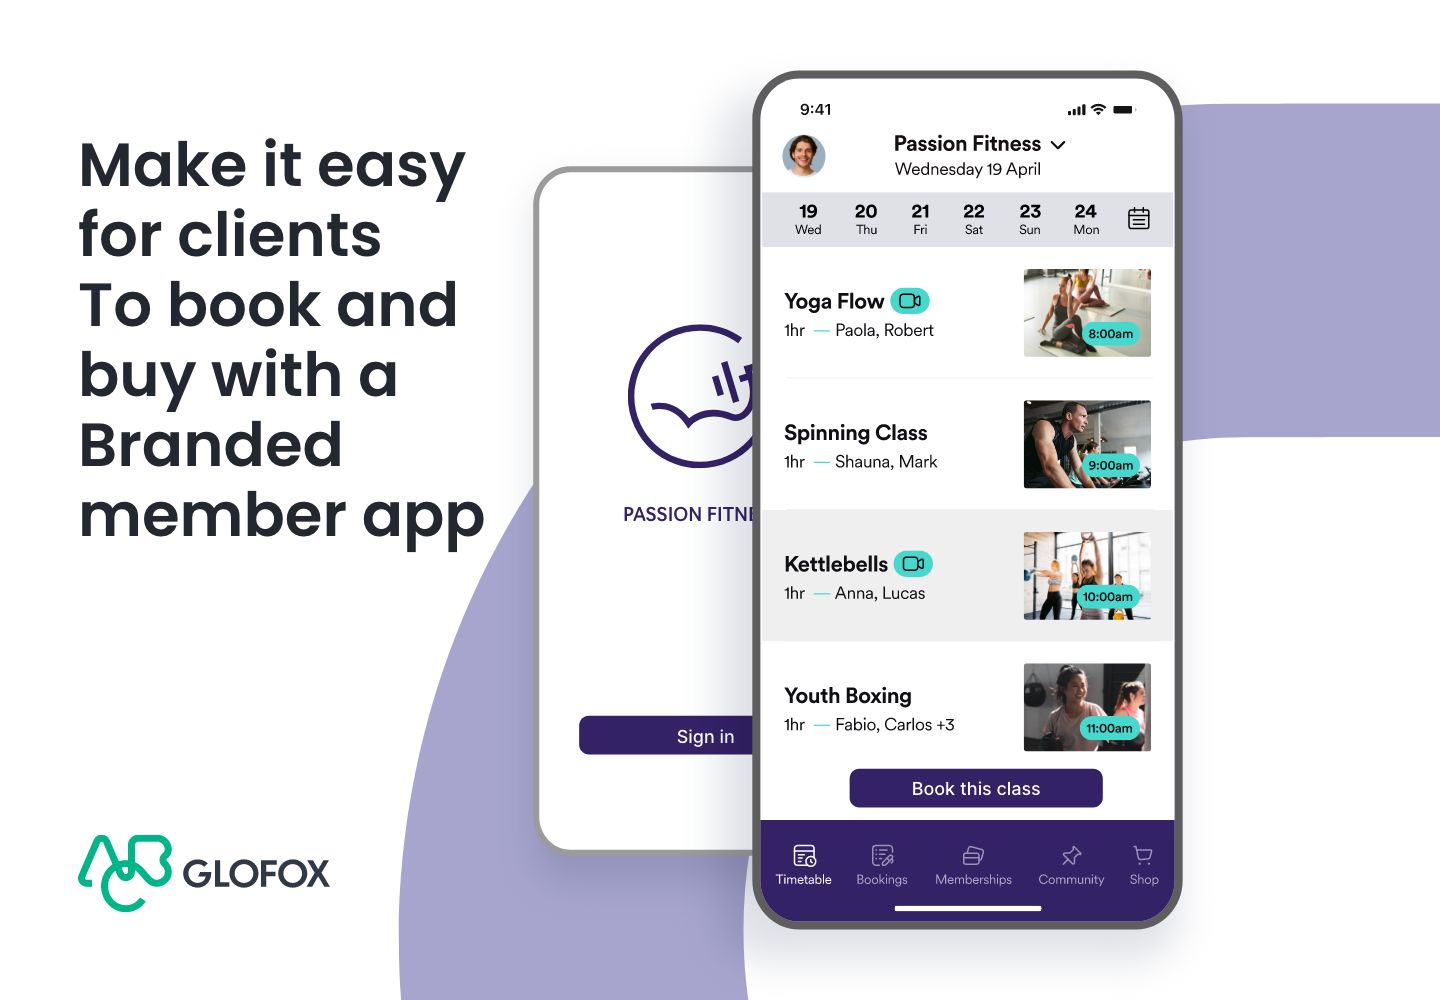 Best Booking App – Easy two-click booking system for your members through the fully branded member app.